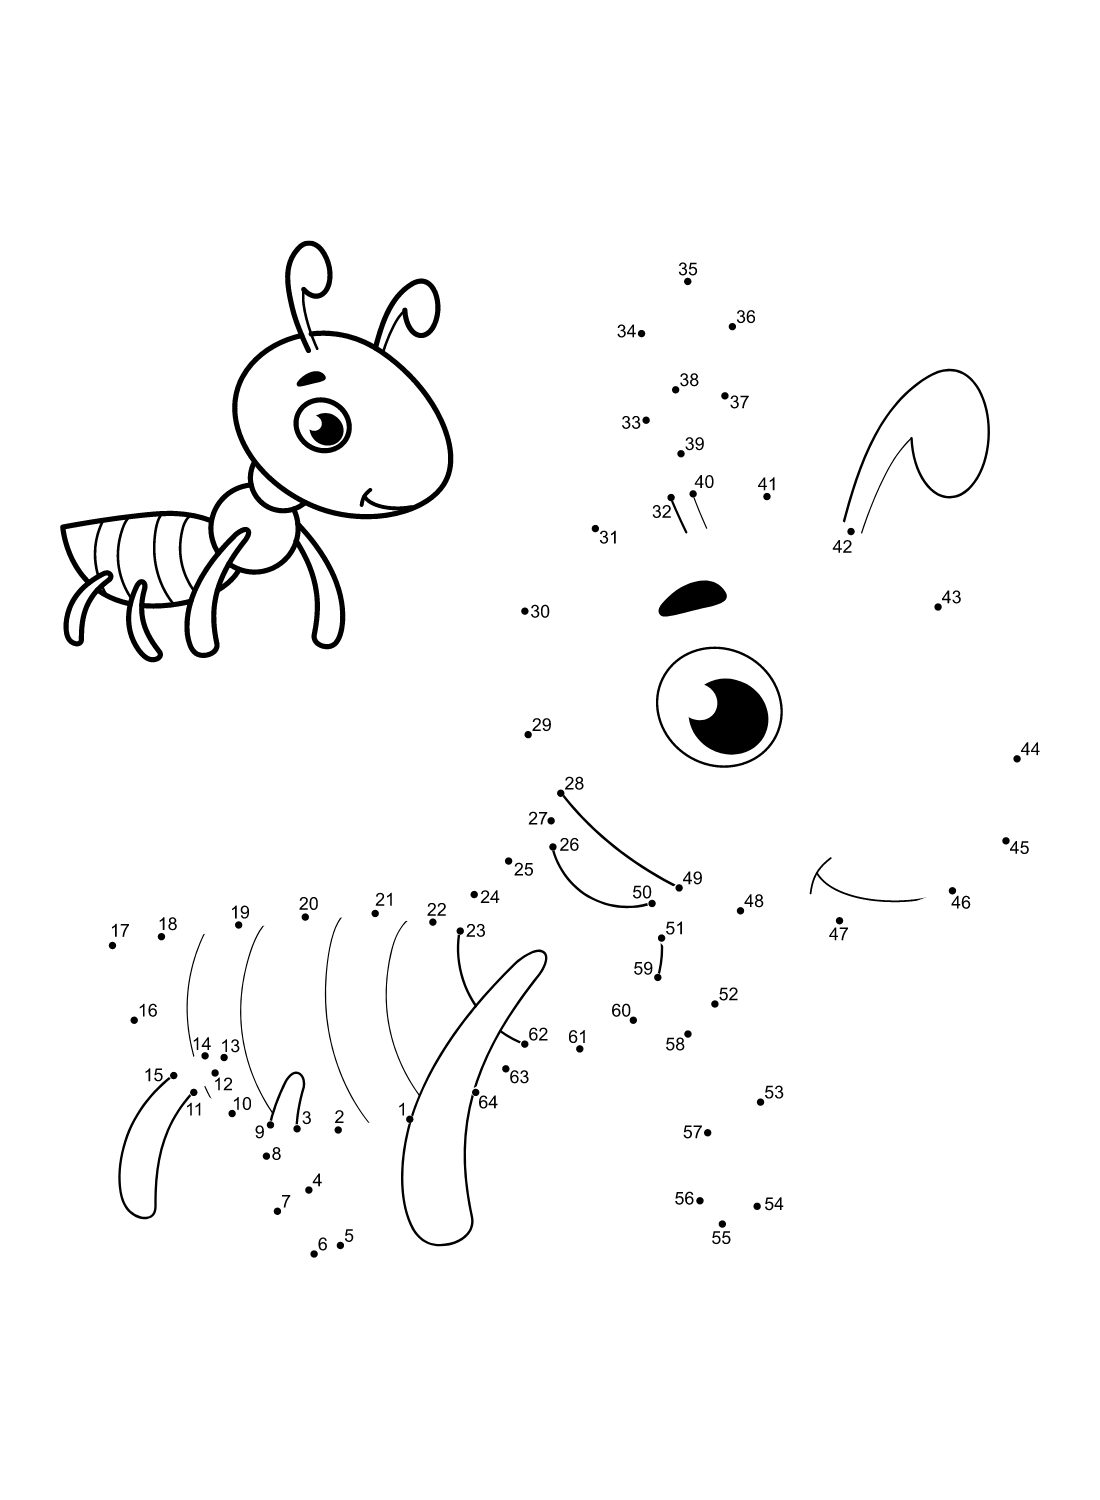 Ants Dot to Dot Coloring Pages